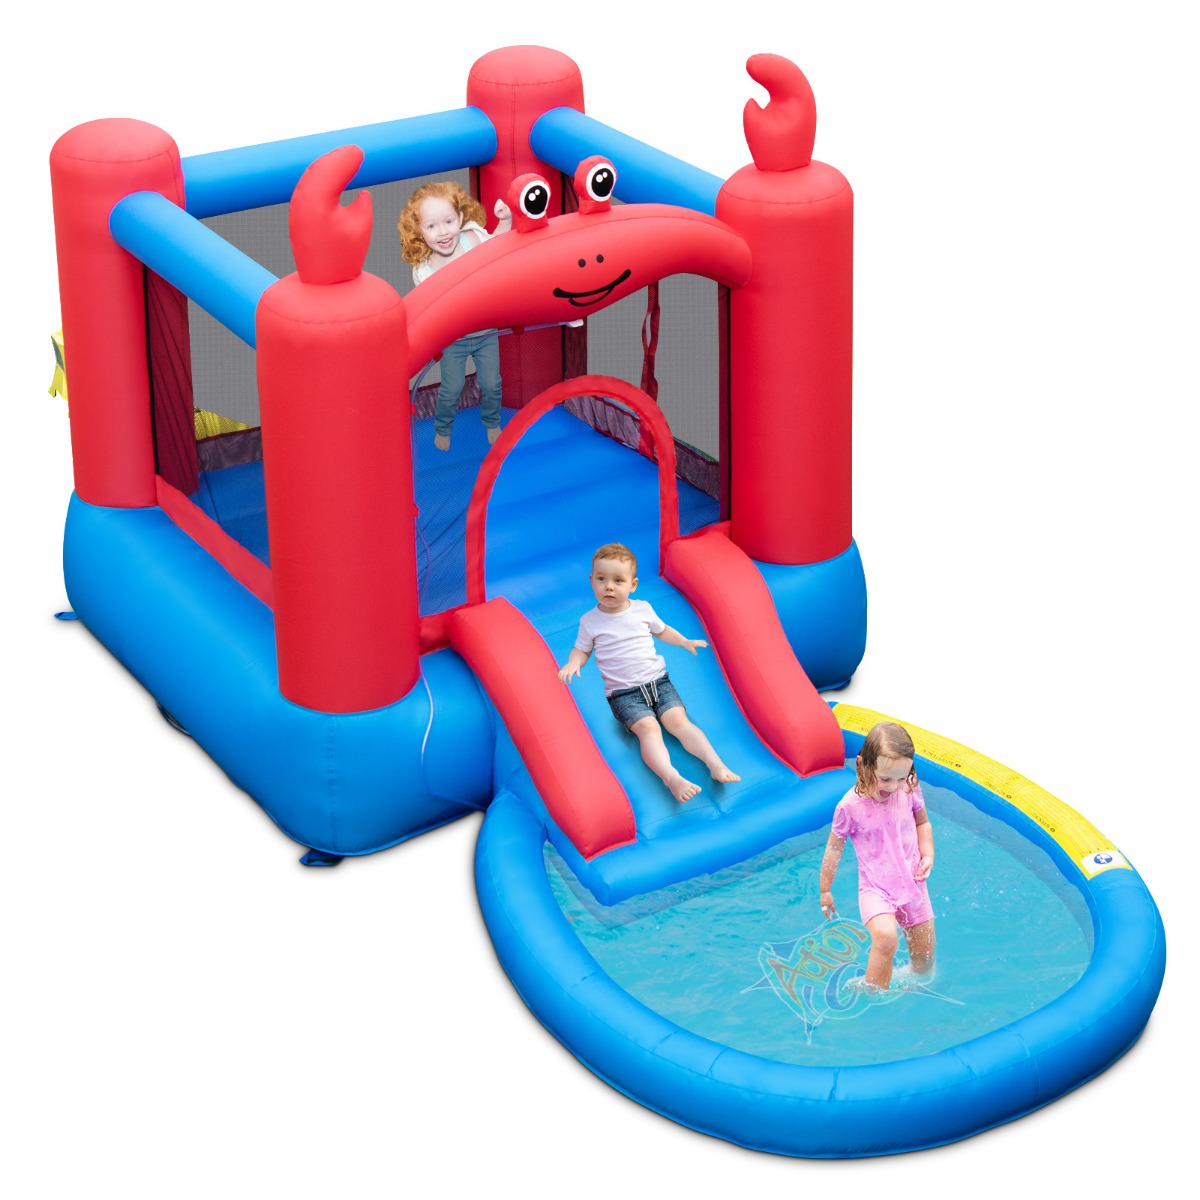 Inflatable Red Crab-themed Water Slide Park with Slide and Splash Pools